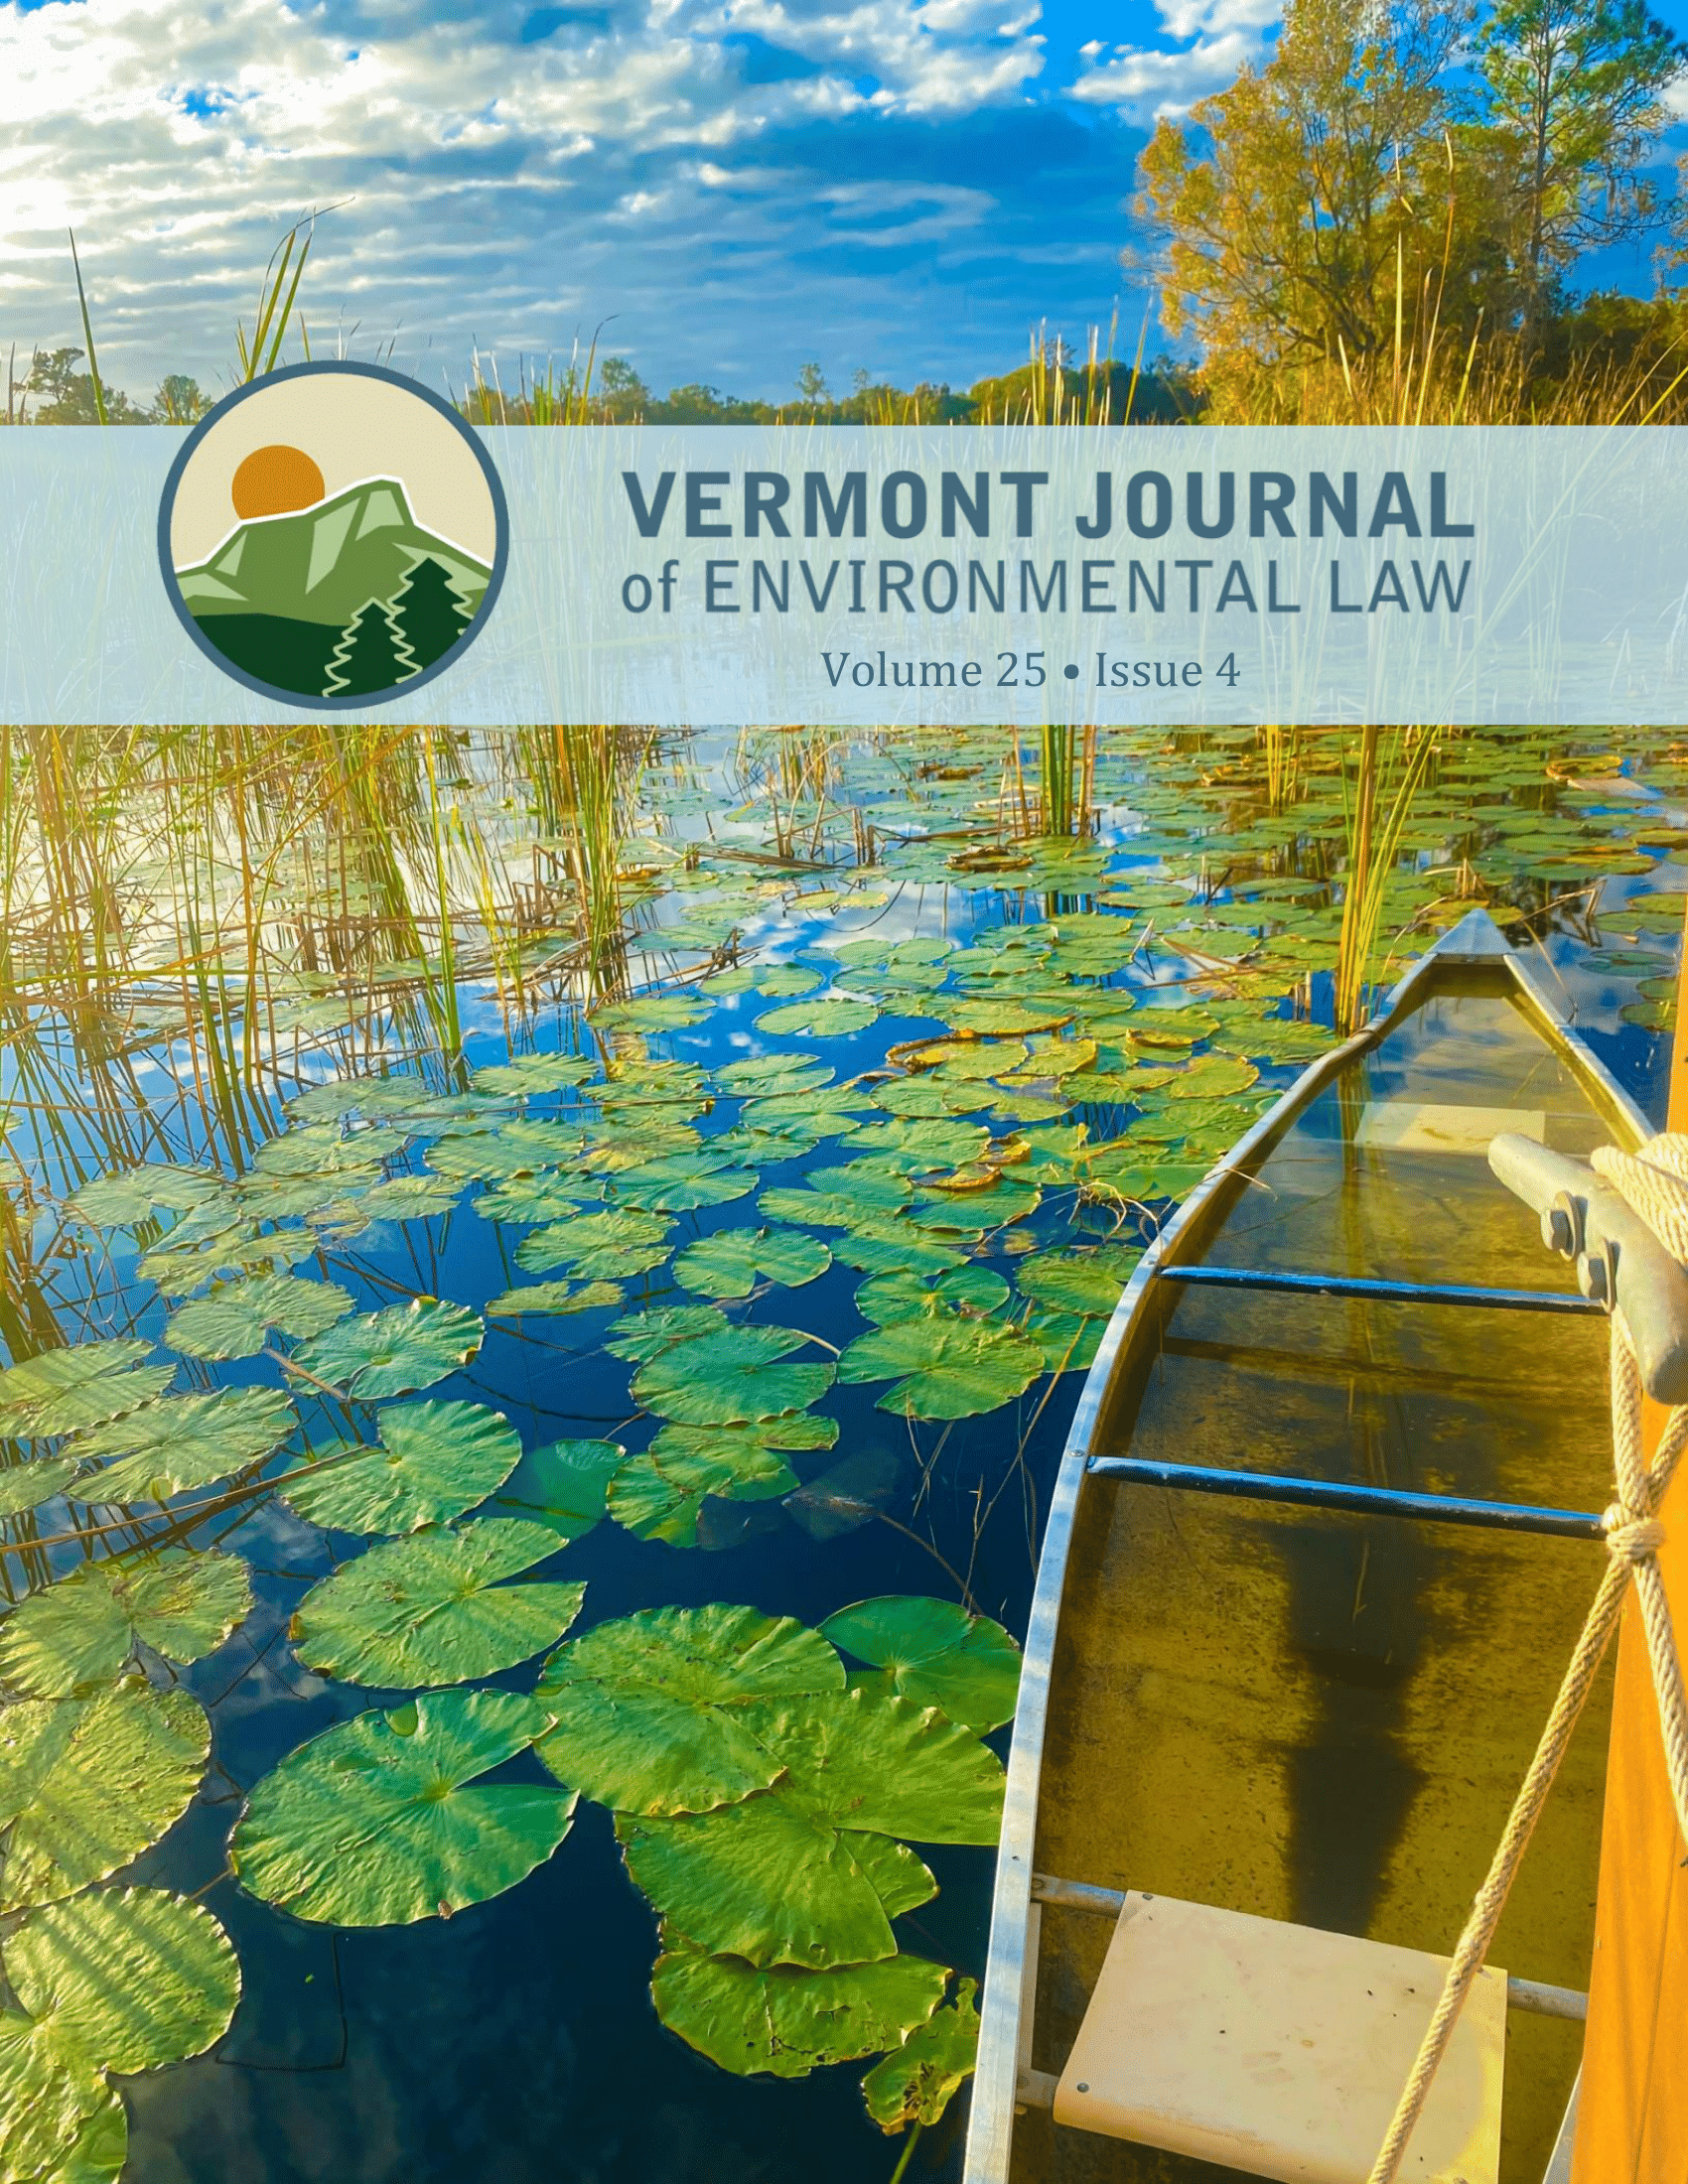 Published: Volume 25, Issue 4 of the Vermont Journal of Environmental Law